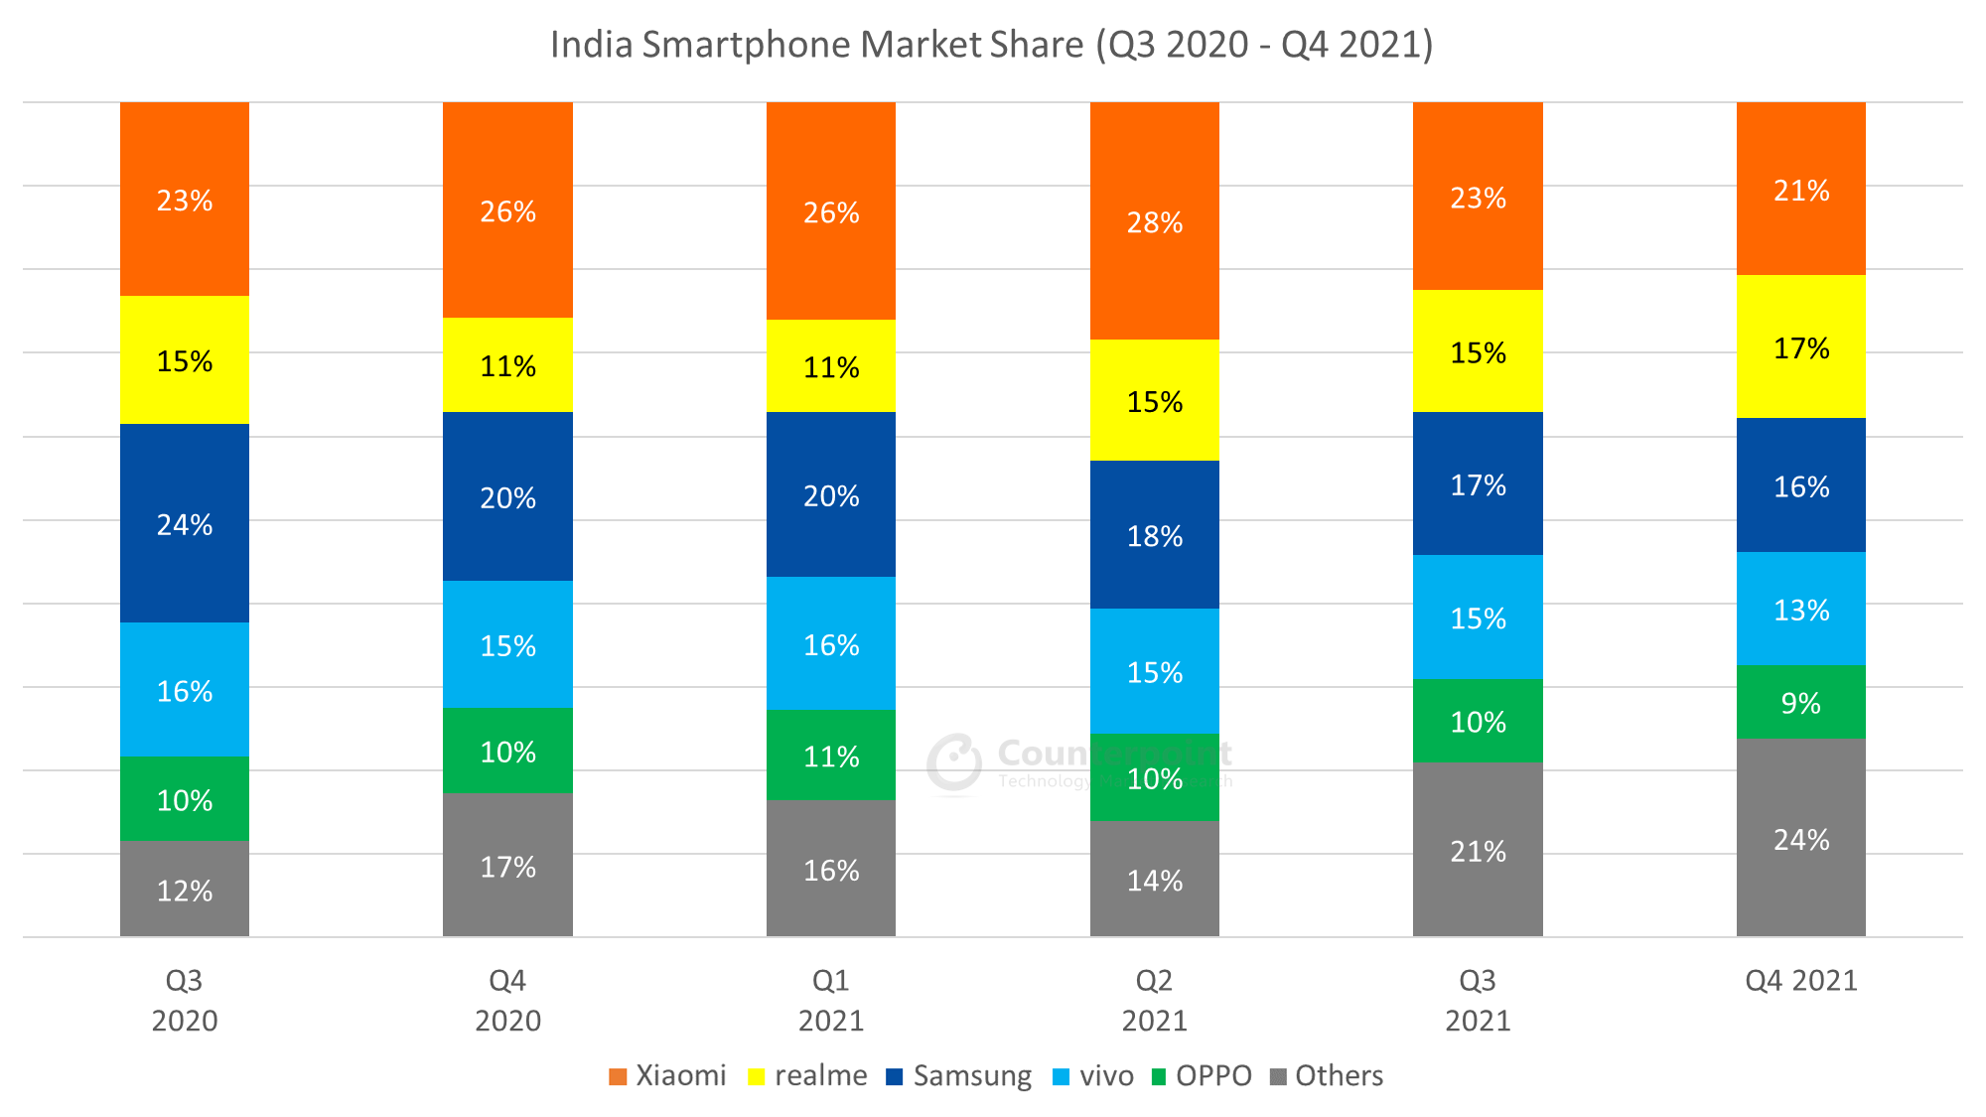 Counterpoint Research Smartphone Market Research - India Q4 2021